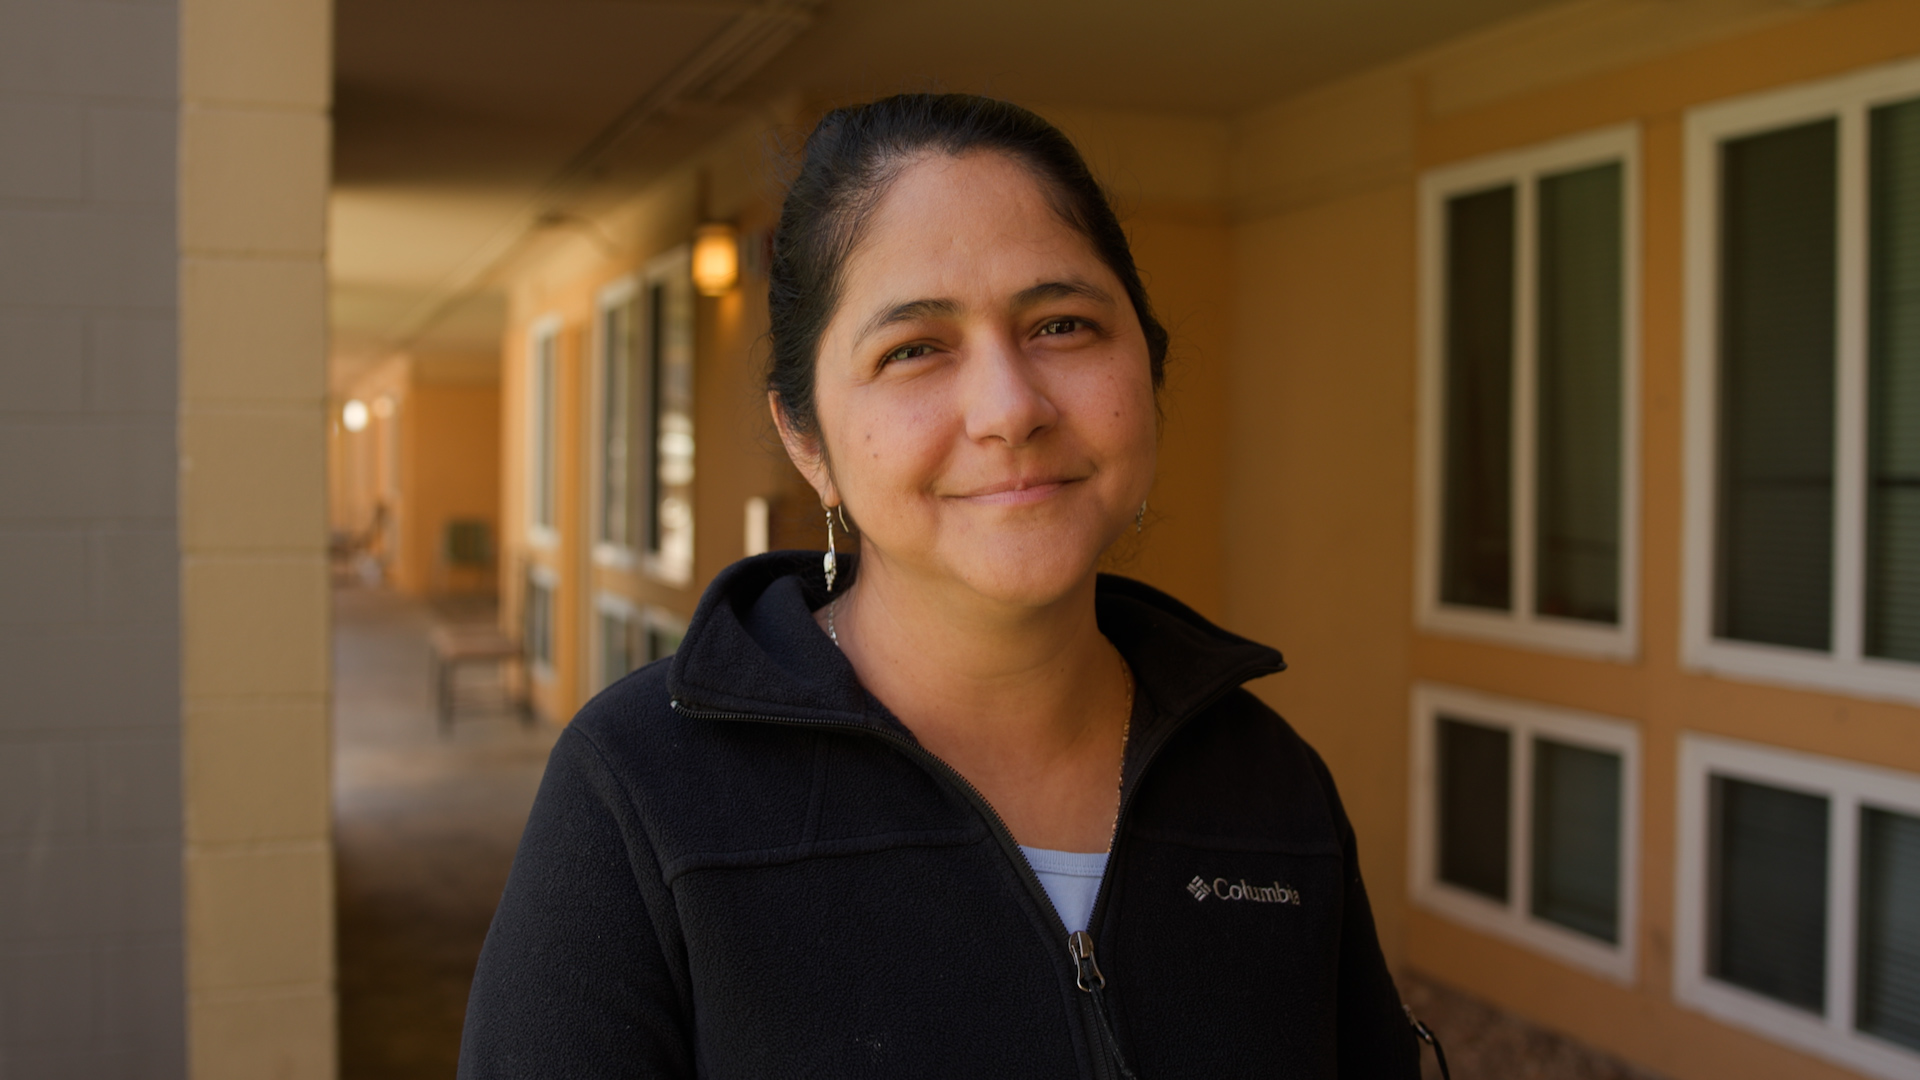 Marilu Jaimes has lived at her apartment complex for years. But when her rent was increased by $500, she had to leave.